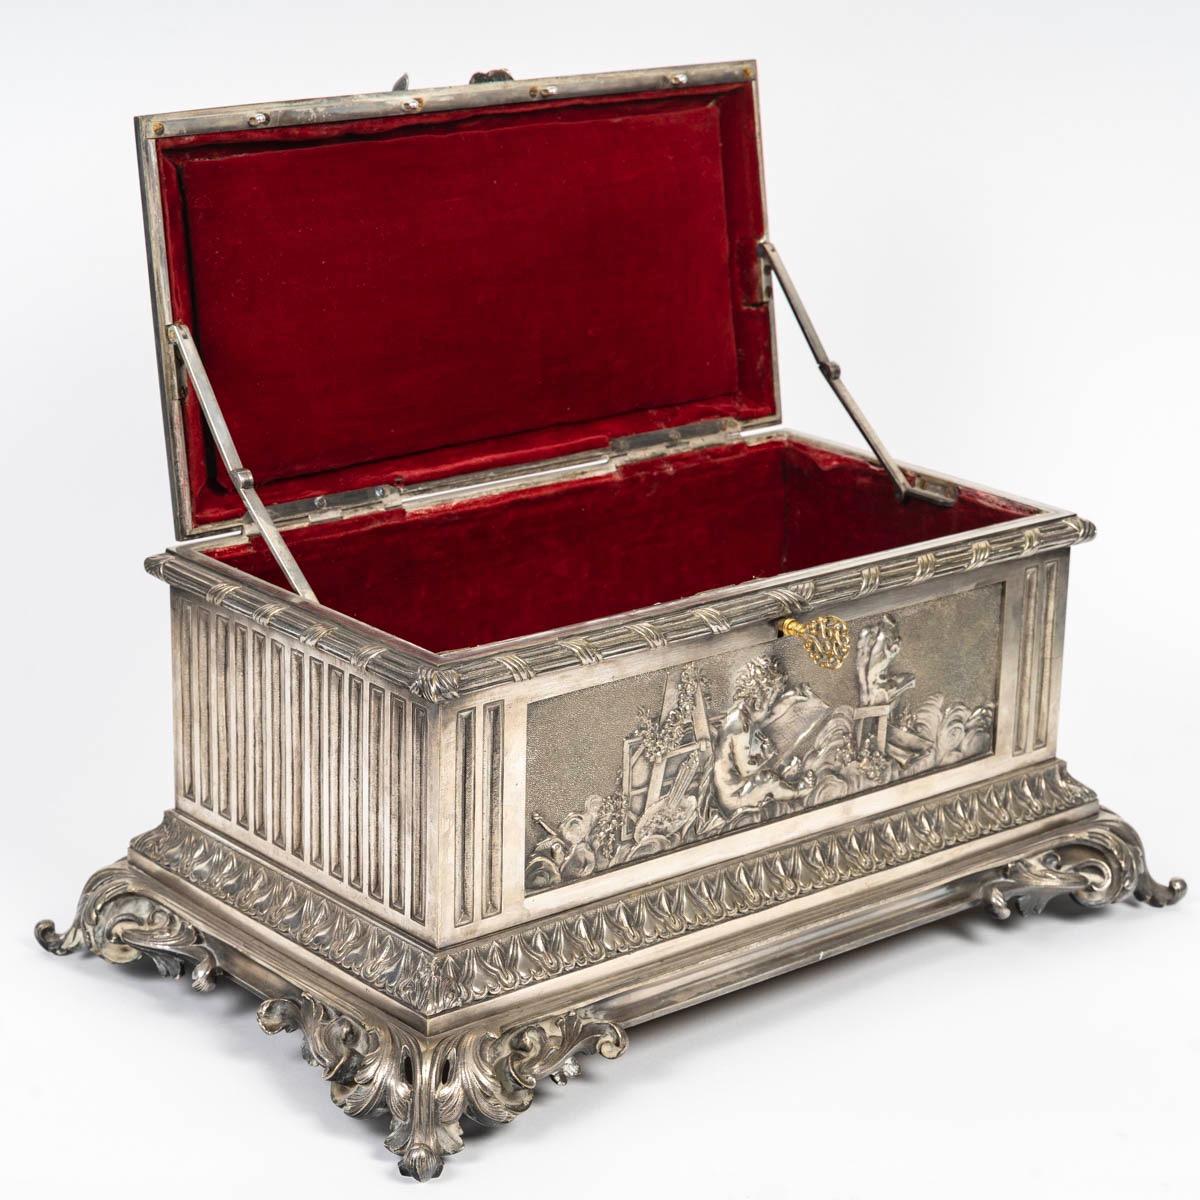 Large Napoleon III Jewelry Casket 
In chiseled and silvered bronze, decorated with putti scenes in the style of Claude Michel dit Clodion (1738-1814), symbolizing Allegories of Arts, 
Sciences and Letters in light relief on three sides.
Heart